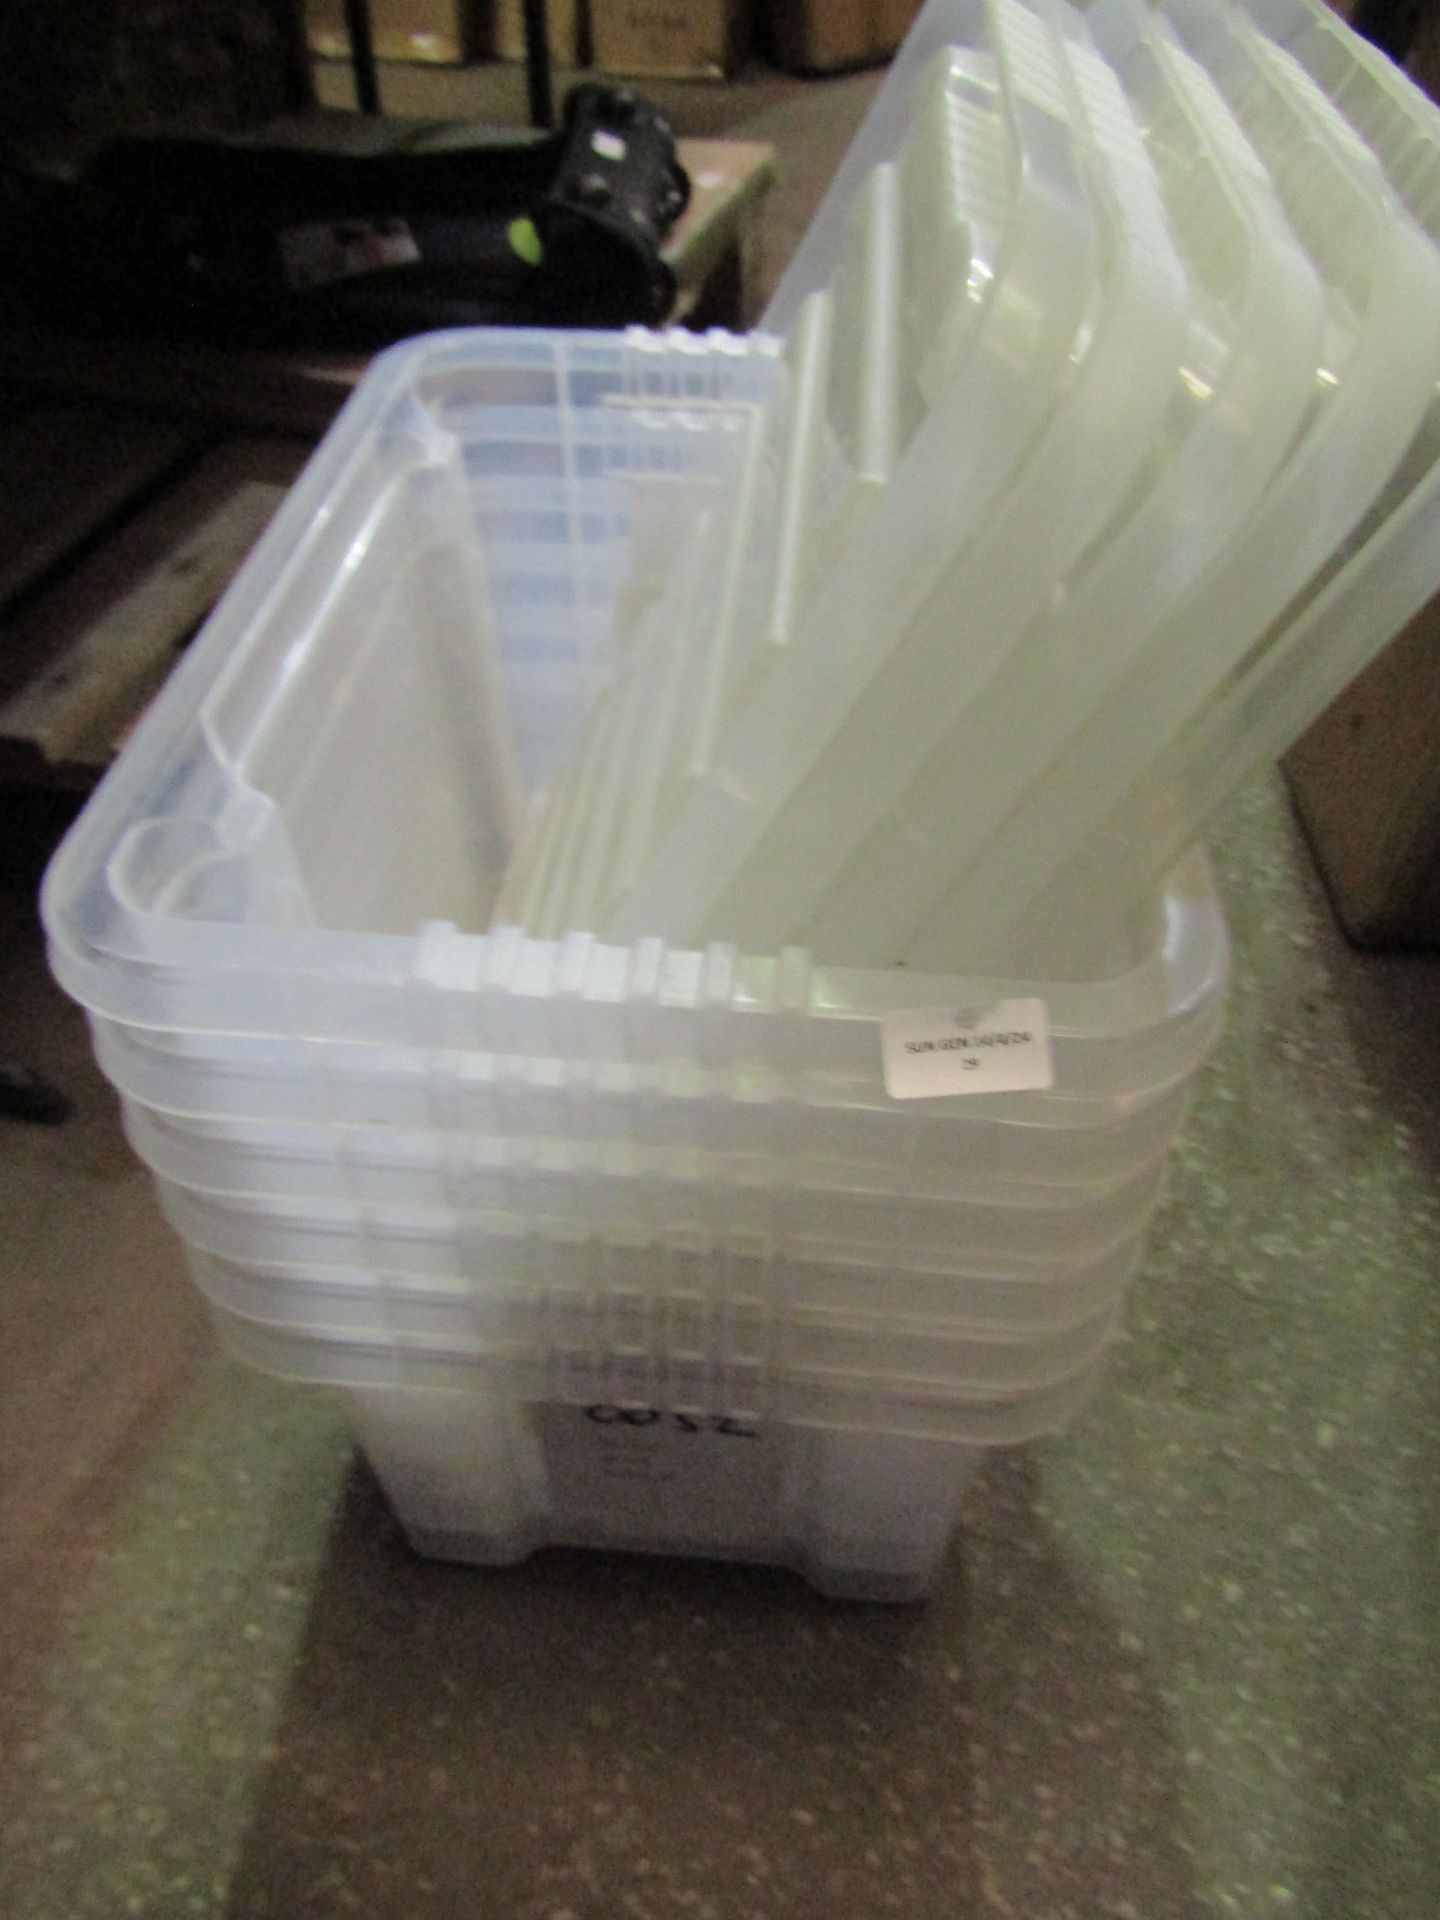 6x Crystal Clear Sorage Boxes With 5 Lids - Fairly Good Condition.